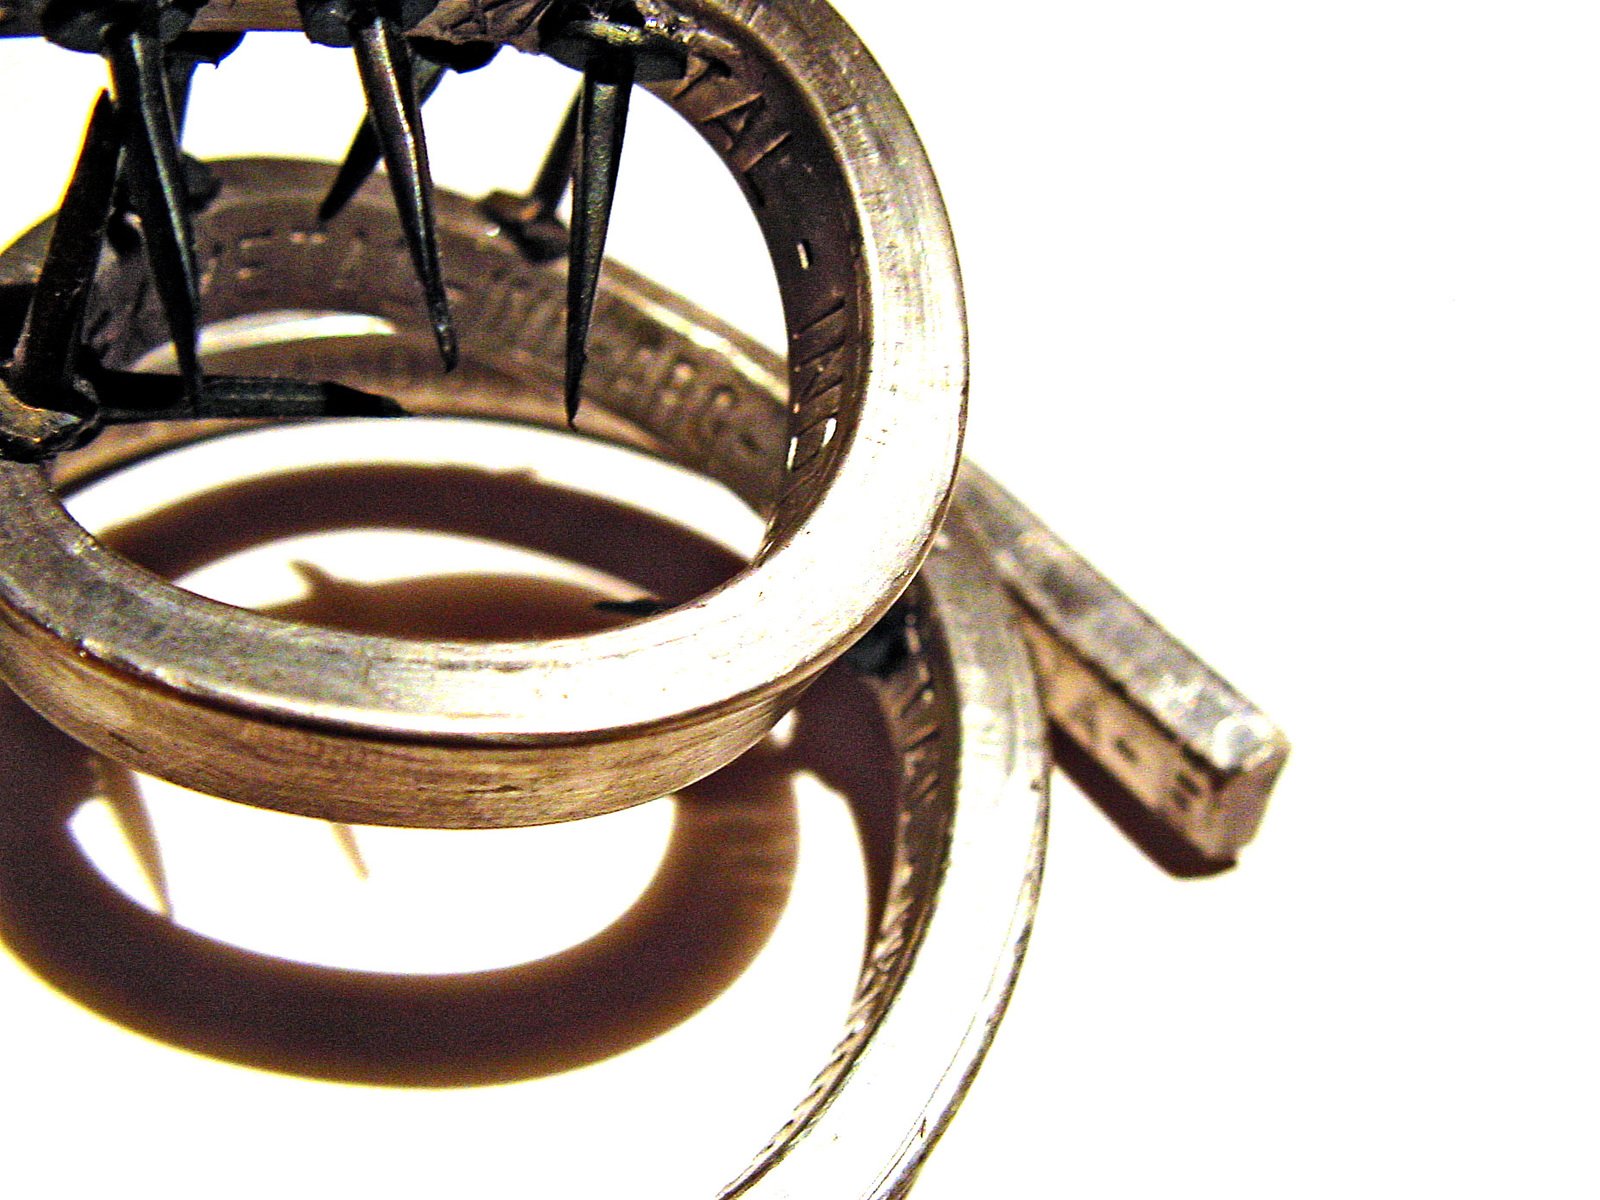 an image of some steel rings and keys